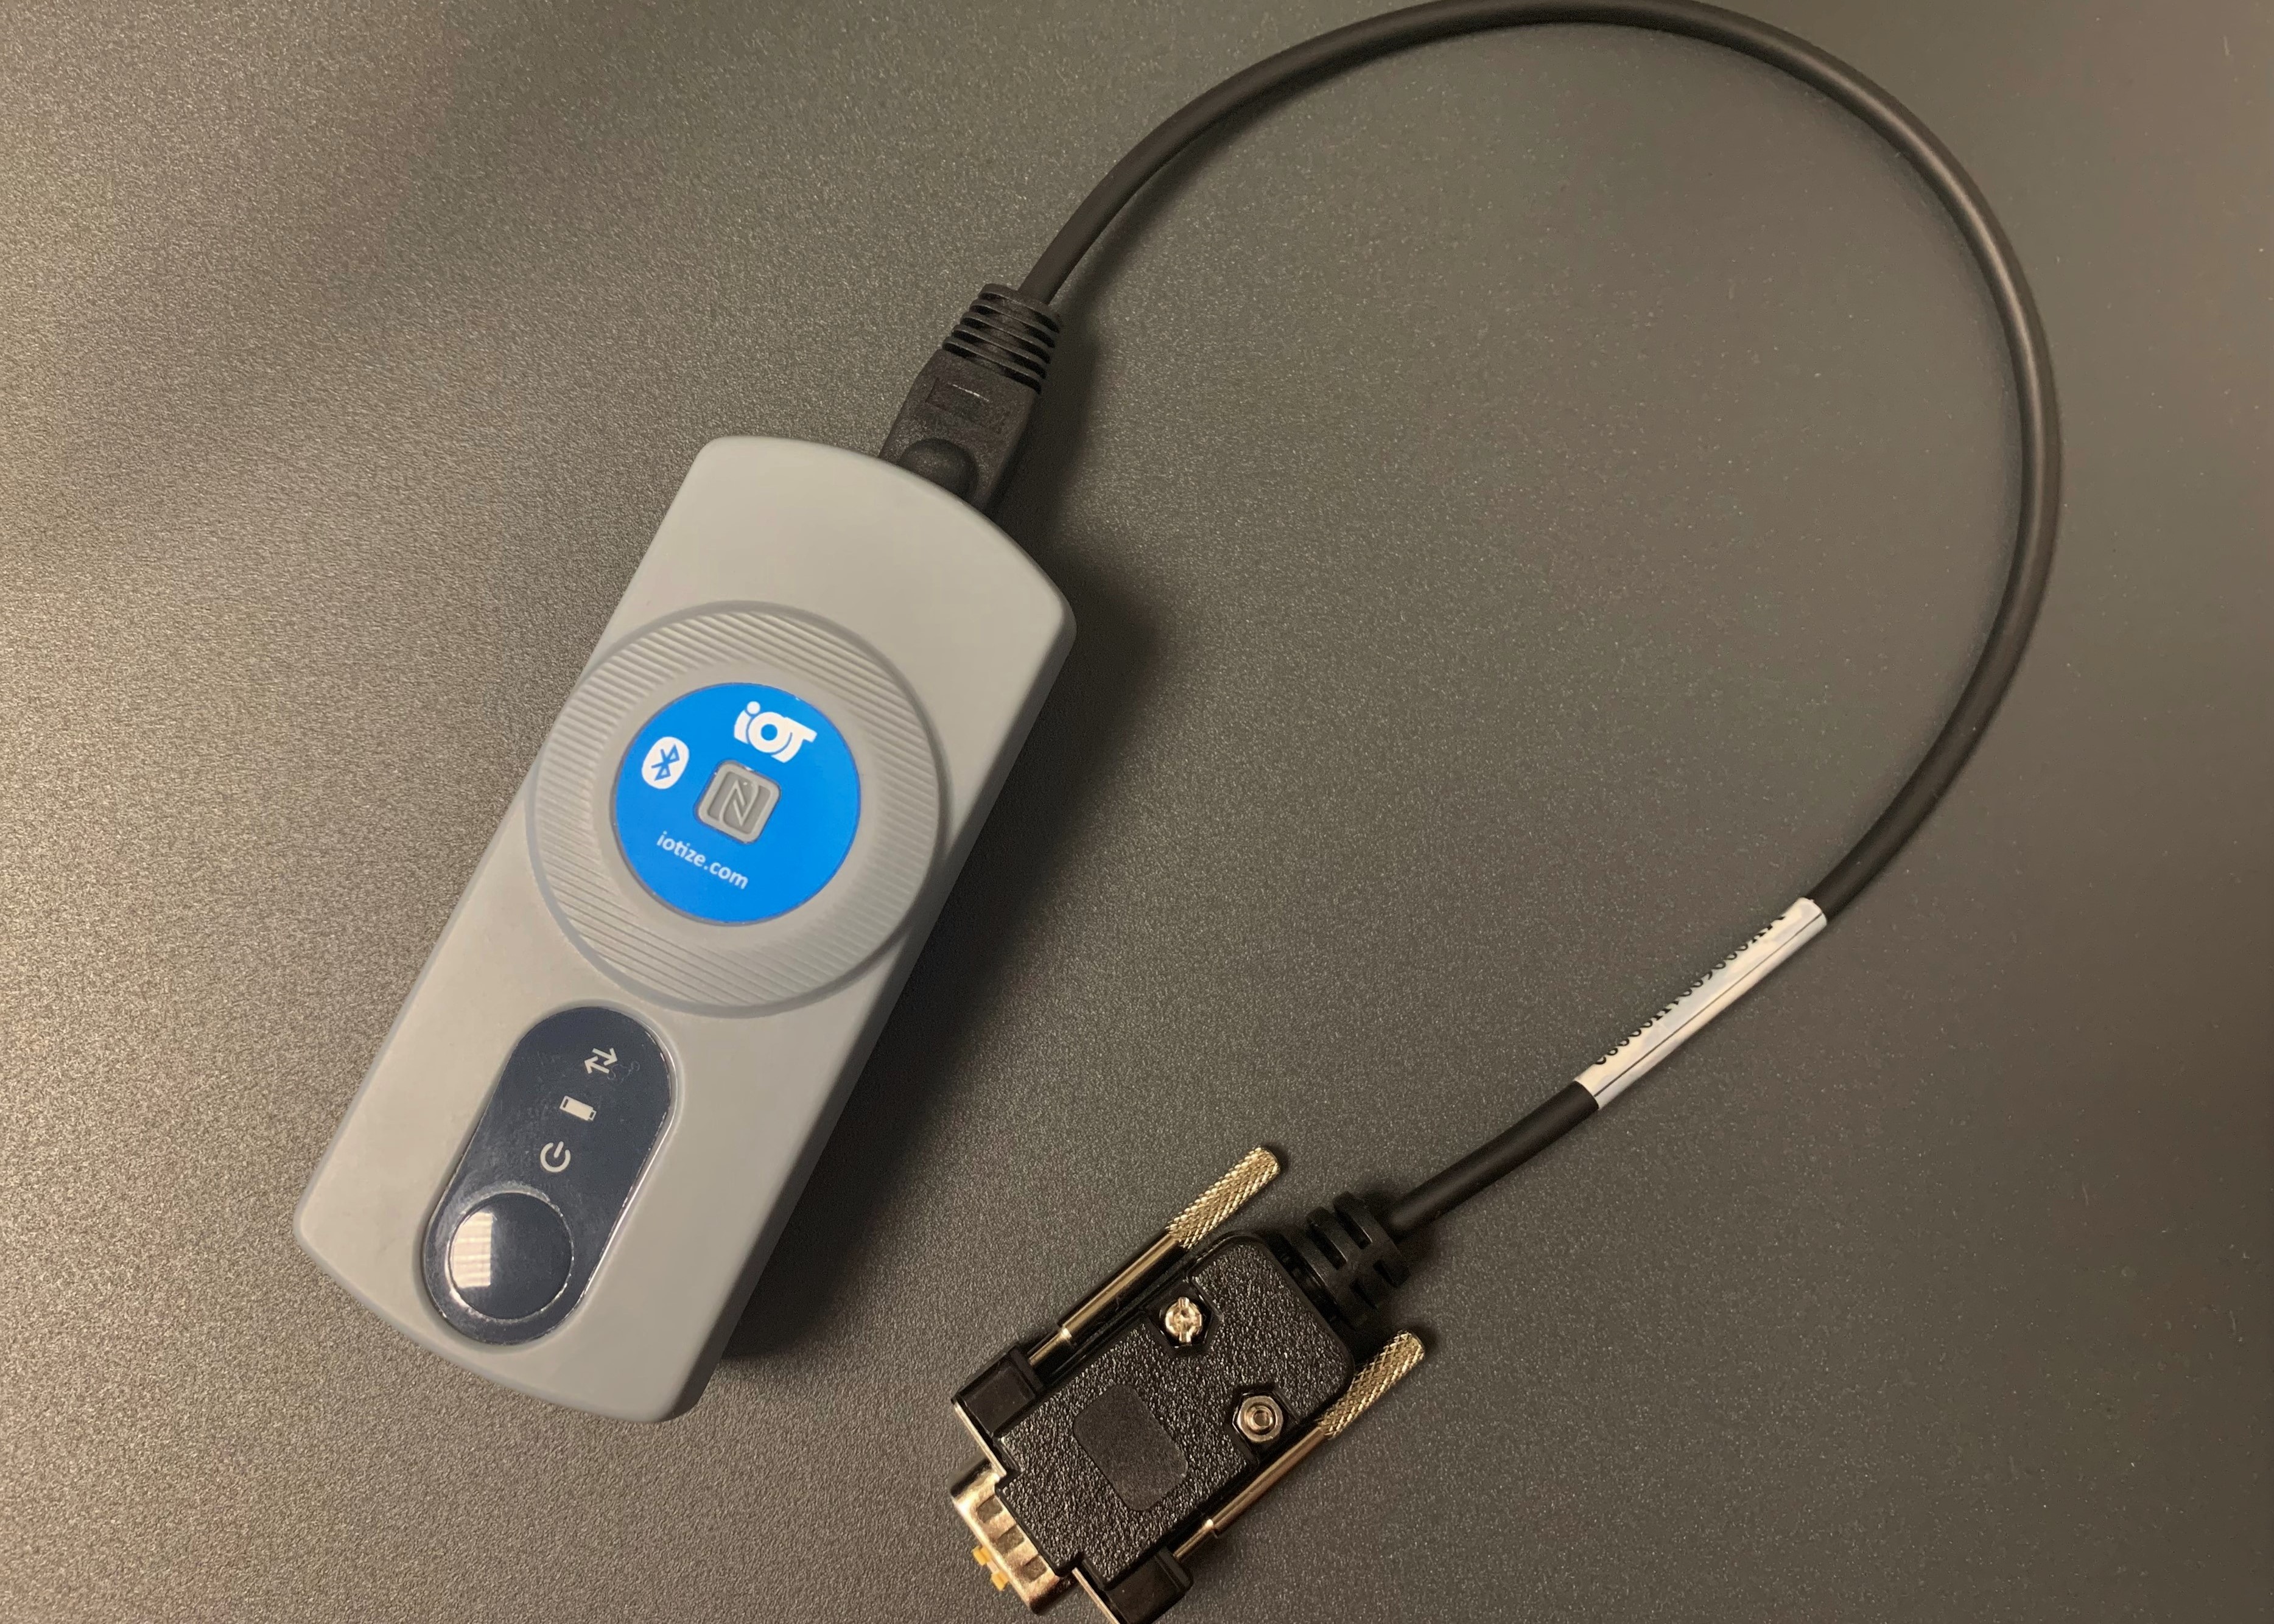 TapNPass connected with RS-232 